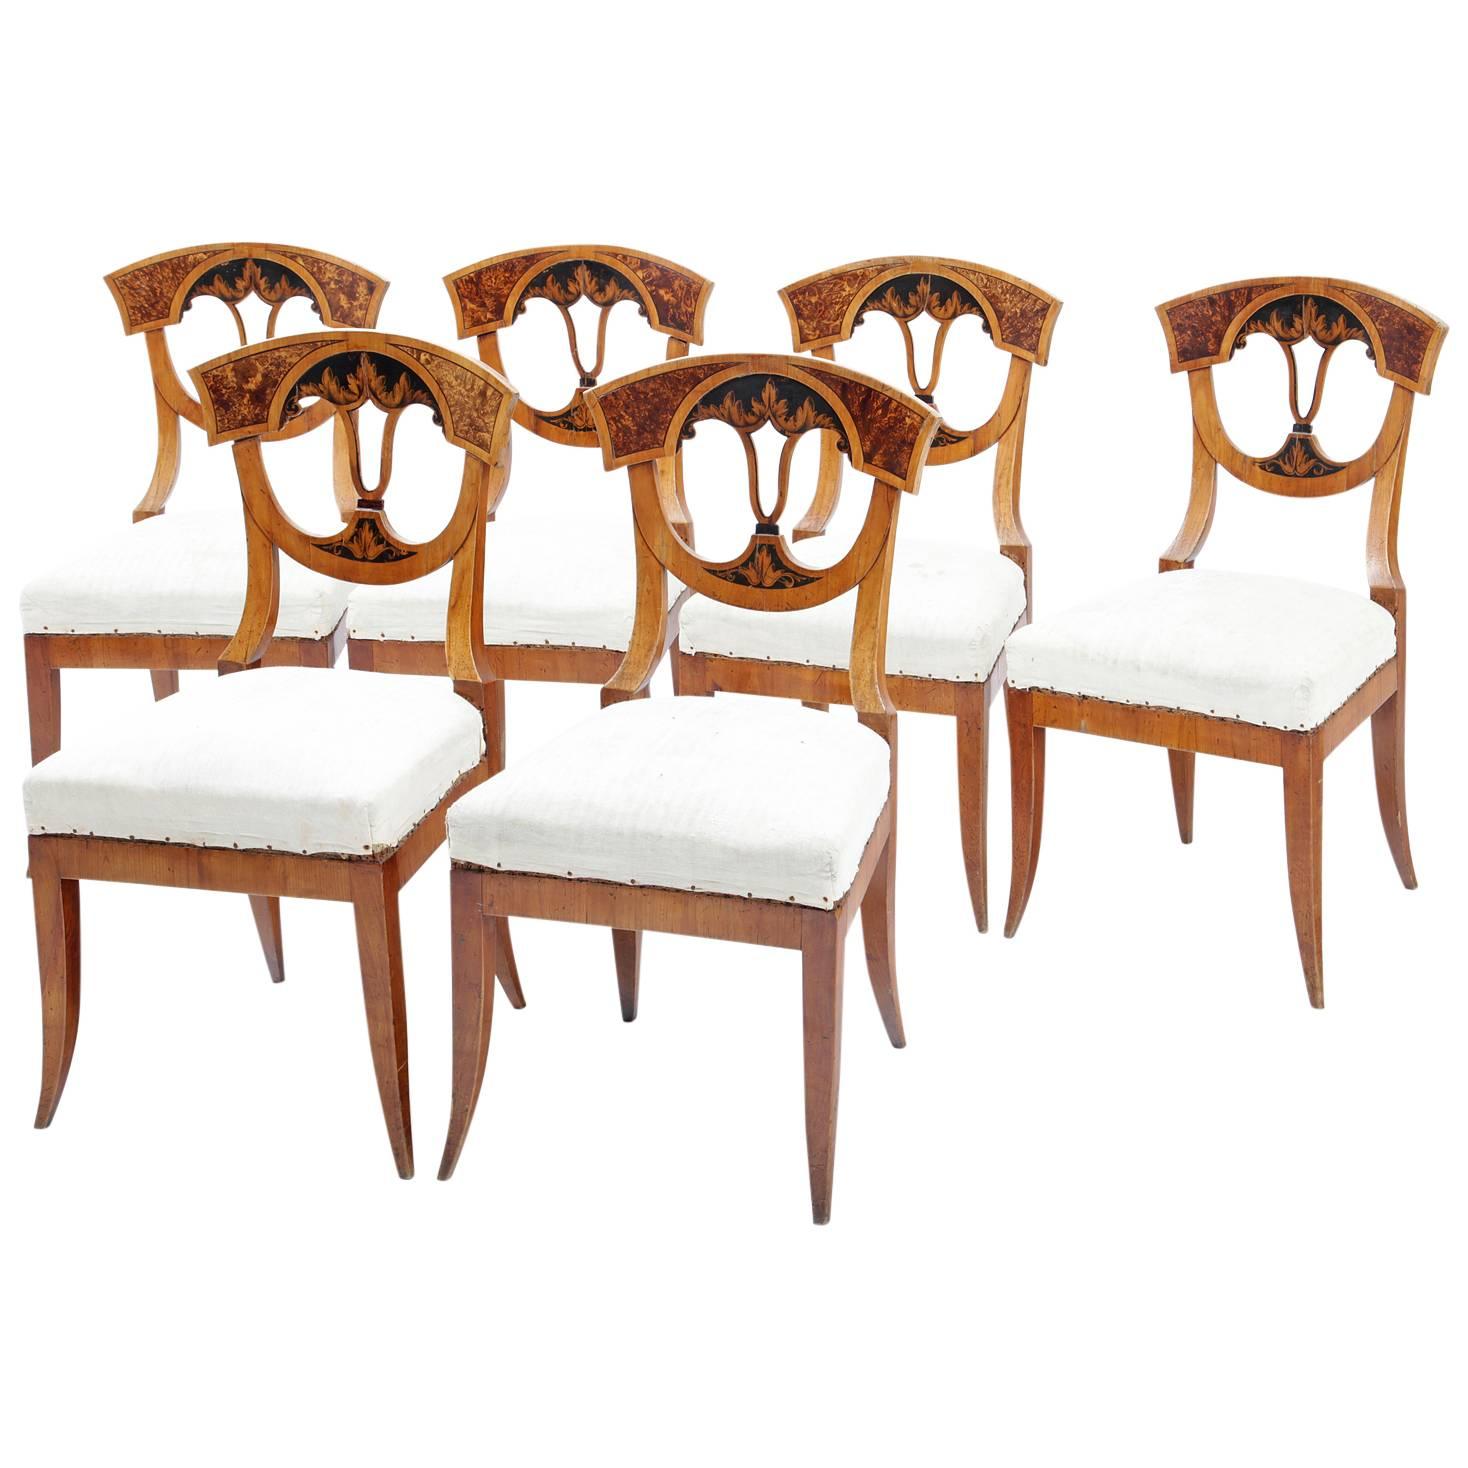 Neoclassical Dining Chairs, German, Franconia, 1820